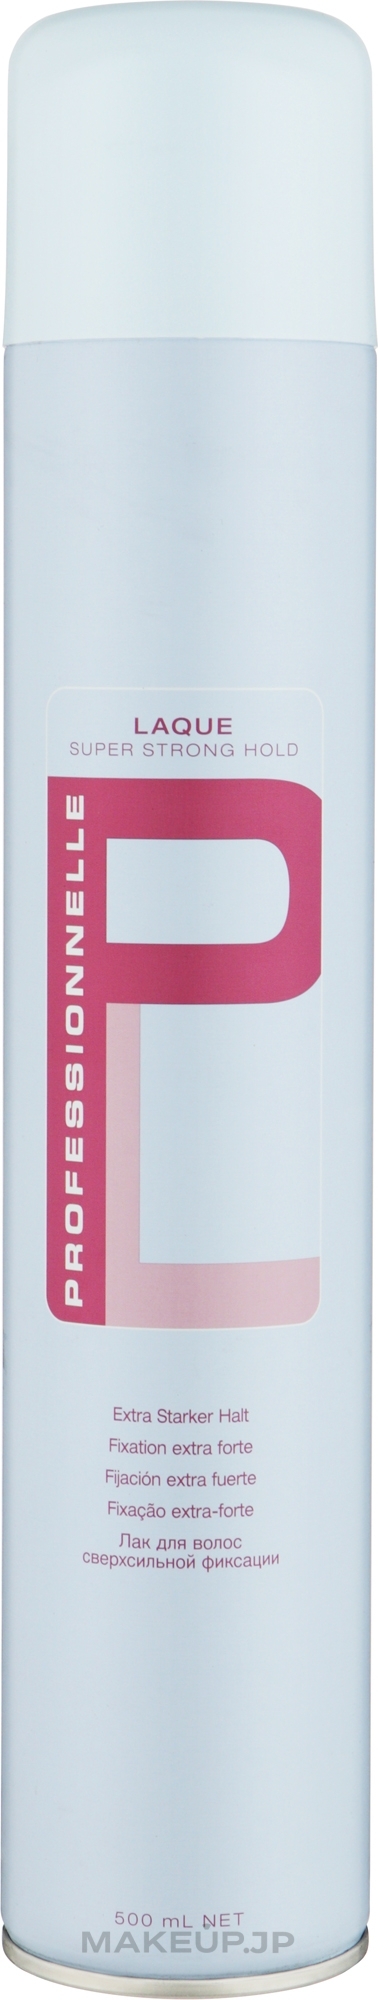 Ultra Strong Hold Hair Spray - Schwarzkopf Professional Professionnelle Laque Super Strong Hold — photo 500 ml